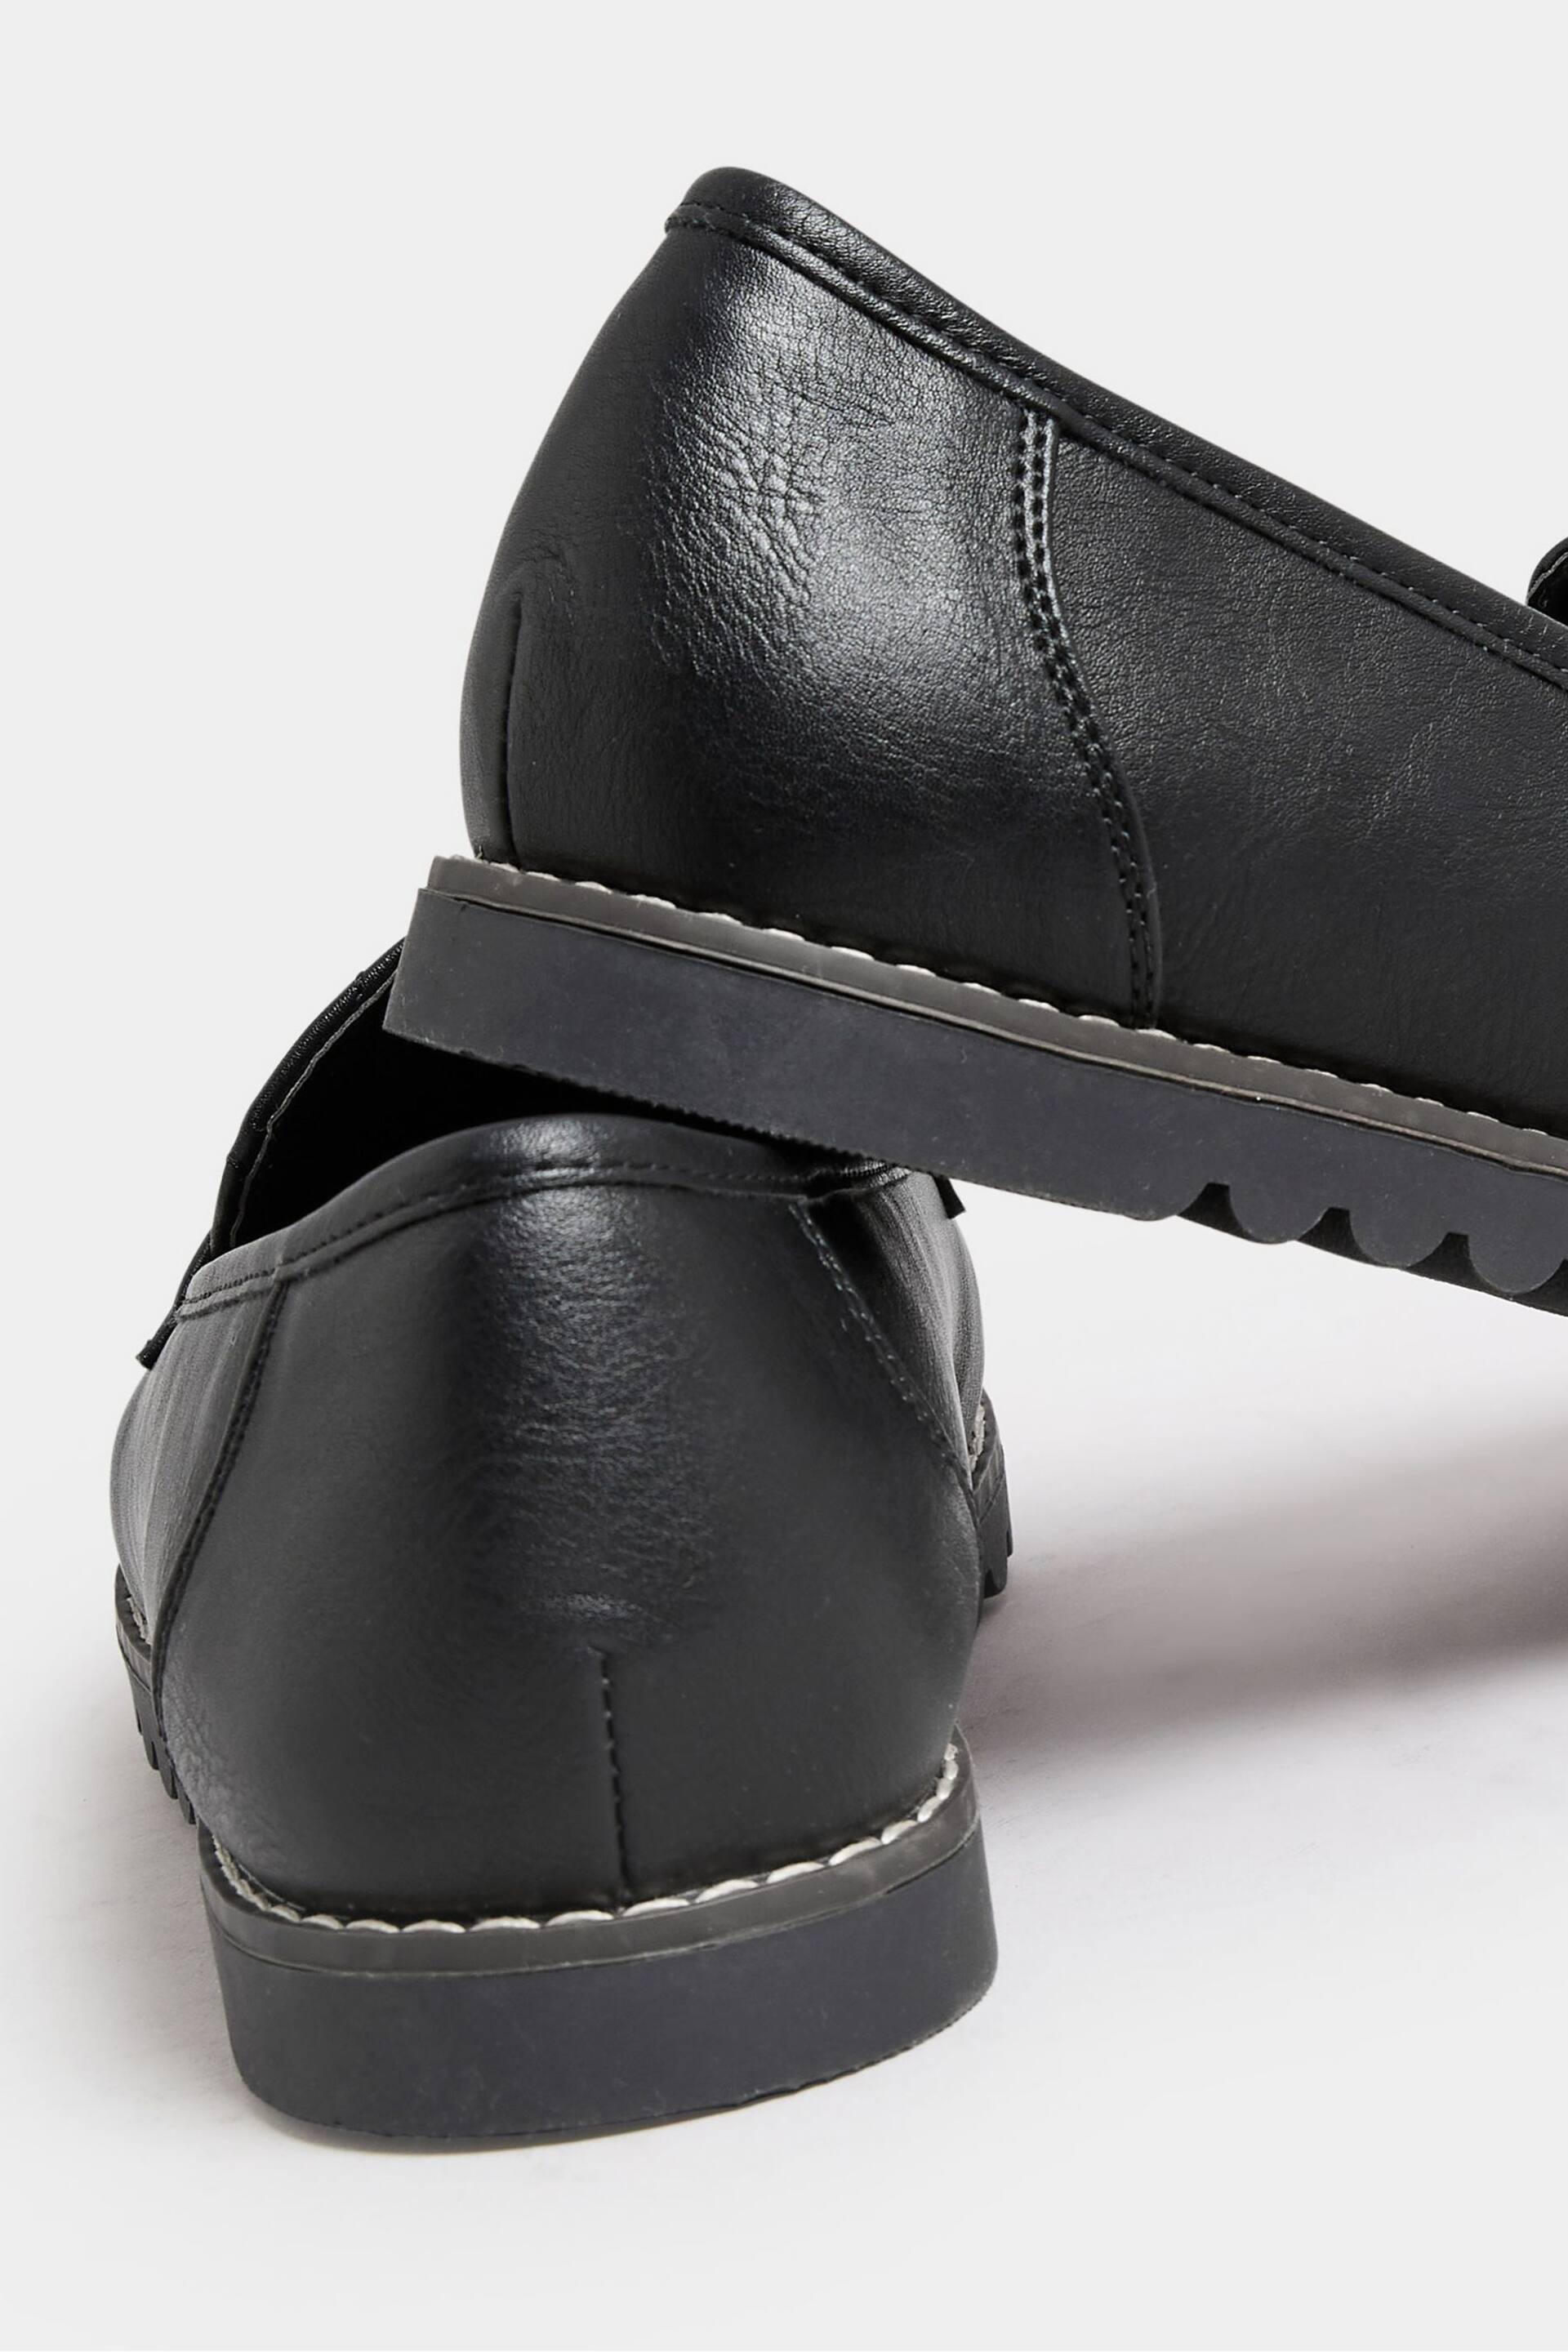 Yours Curve Black Extra Wide Fit Quilted Loafers - Image 4 of 5